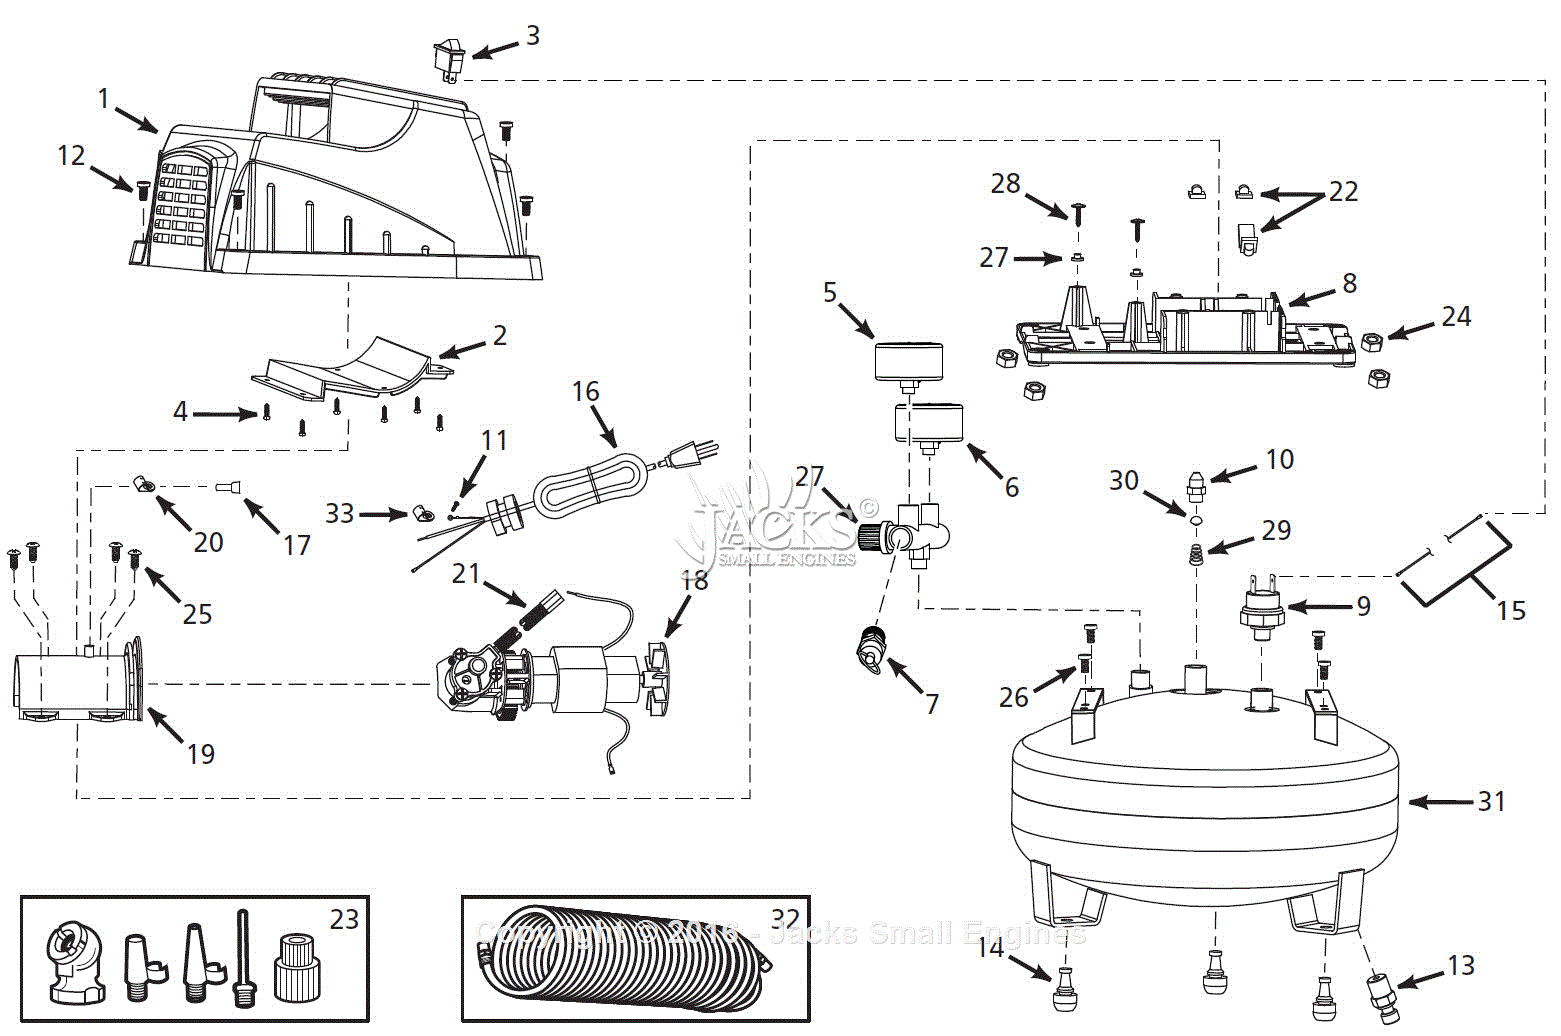 Campbell Hausfeld FP202801 Parts Diagram for Air-Compressor Parts Emerson Motor Wiring Diagram Jacks Small Engines